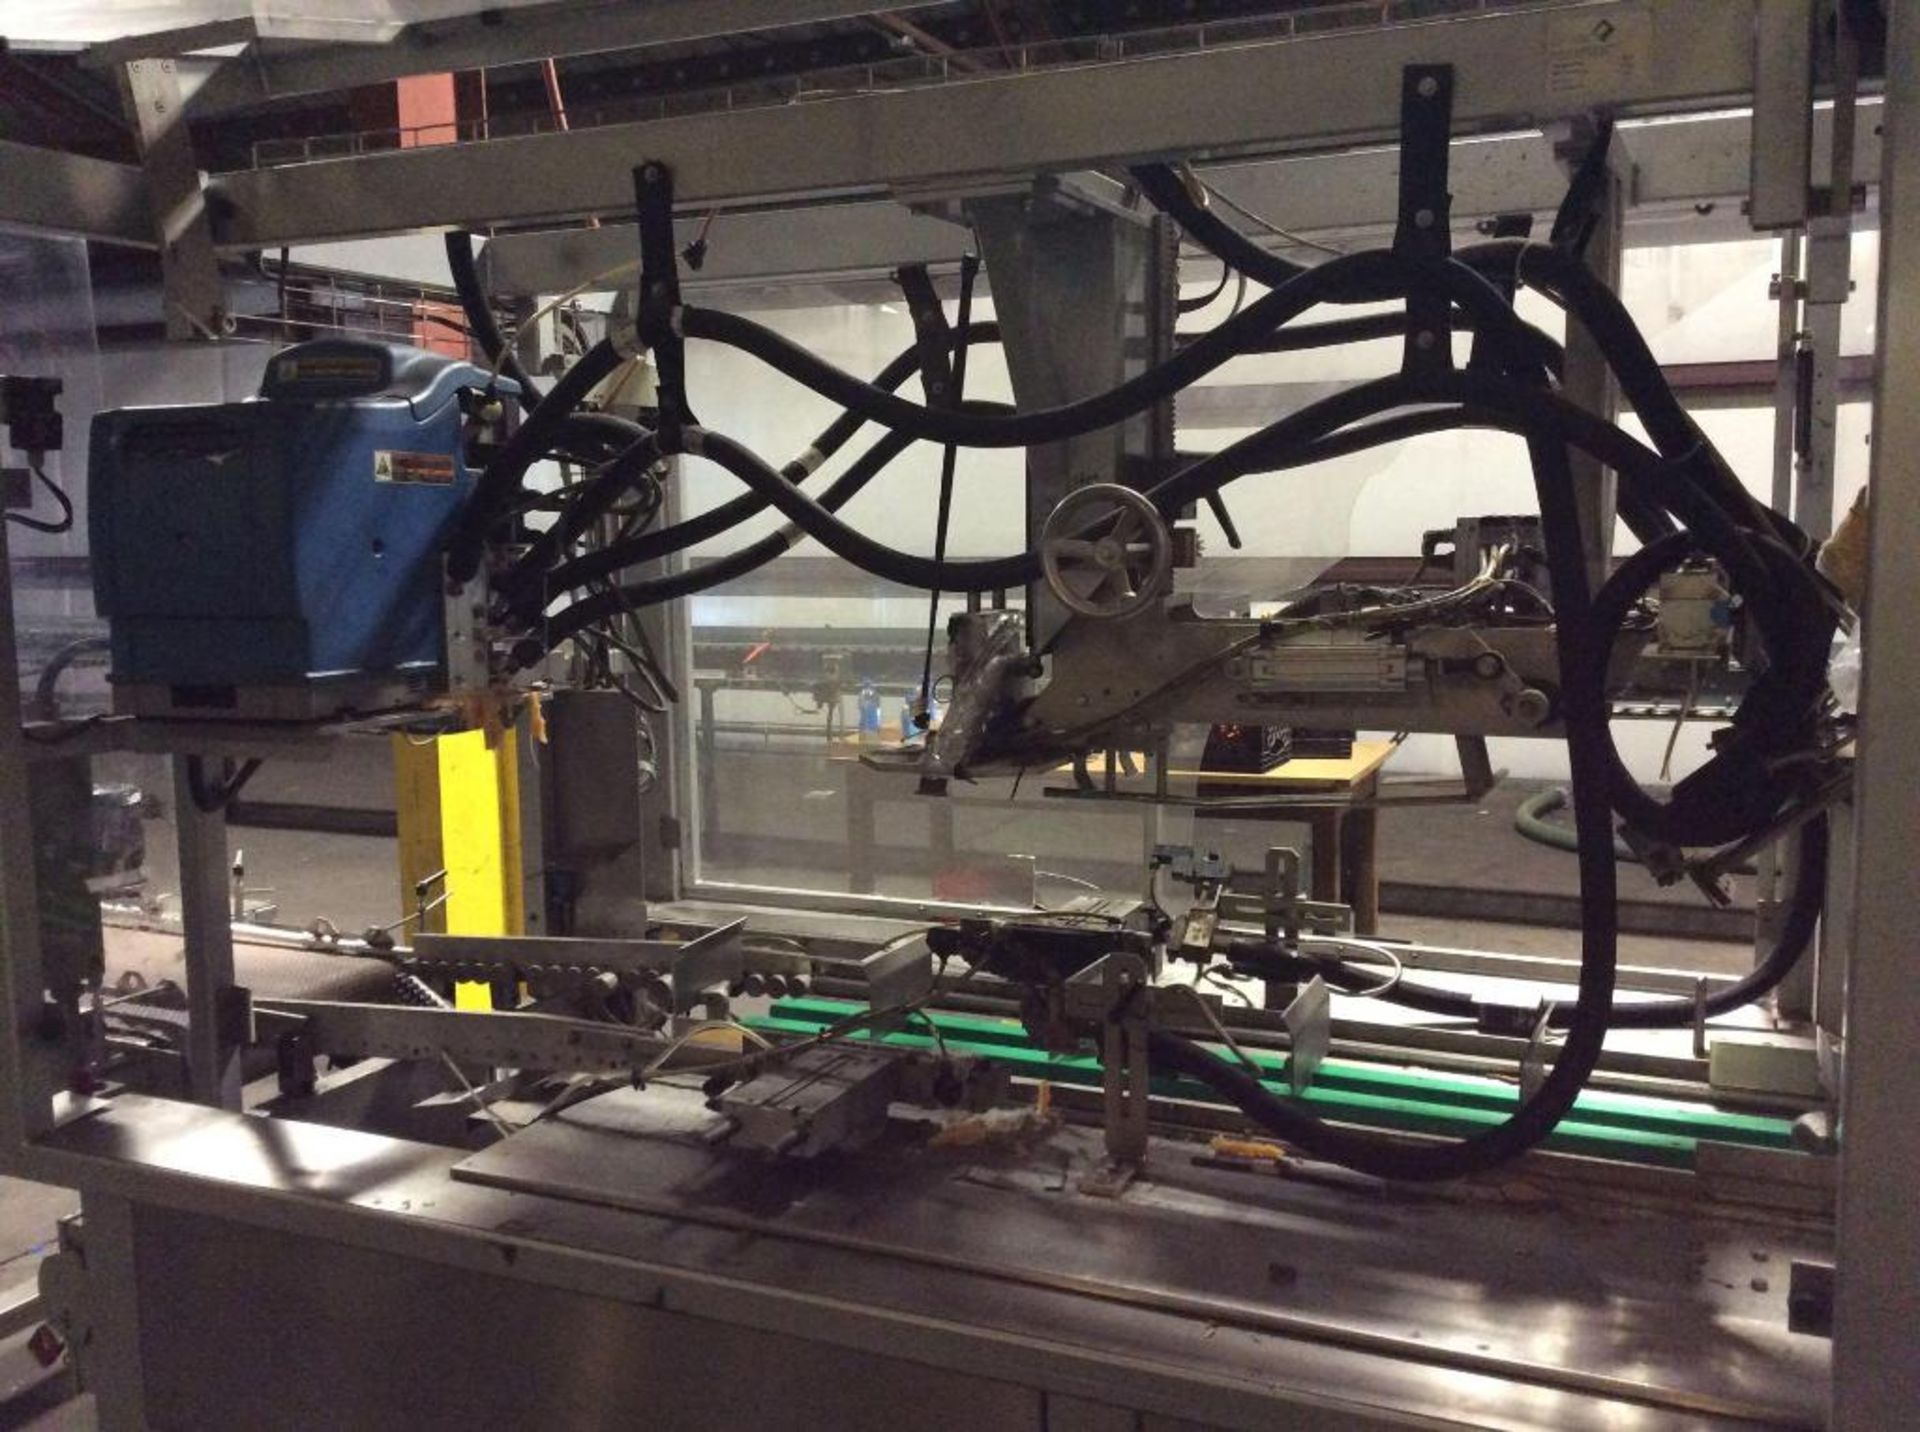 Meypack Wraparound Case / Tray Packer, mn VP451, sn 9439, capable of 30 trays / cases per minute max - Image 3 of 10